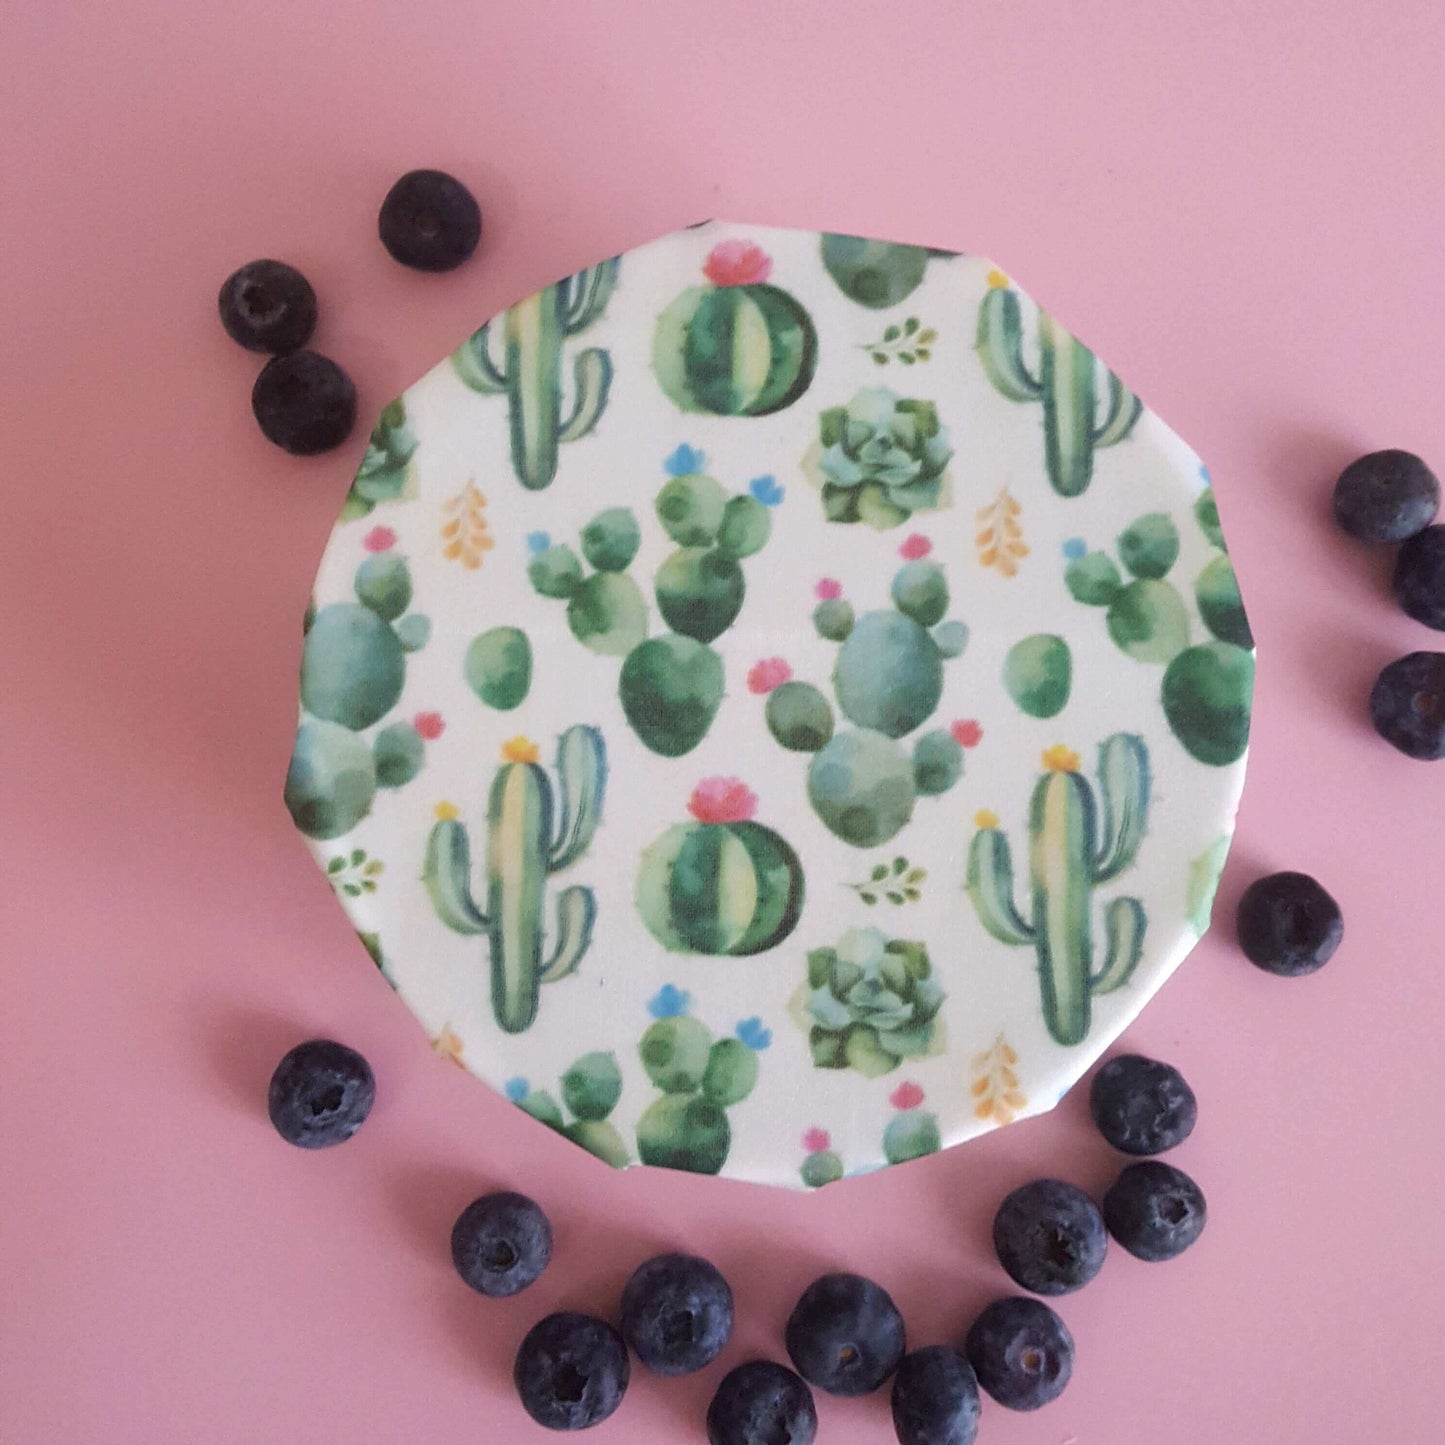 Reusable Beeswax Food Wraps 100% Hand Made in the UK by Honey Bee Good shown in Set of 3 Cactus pattern on bowl